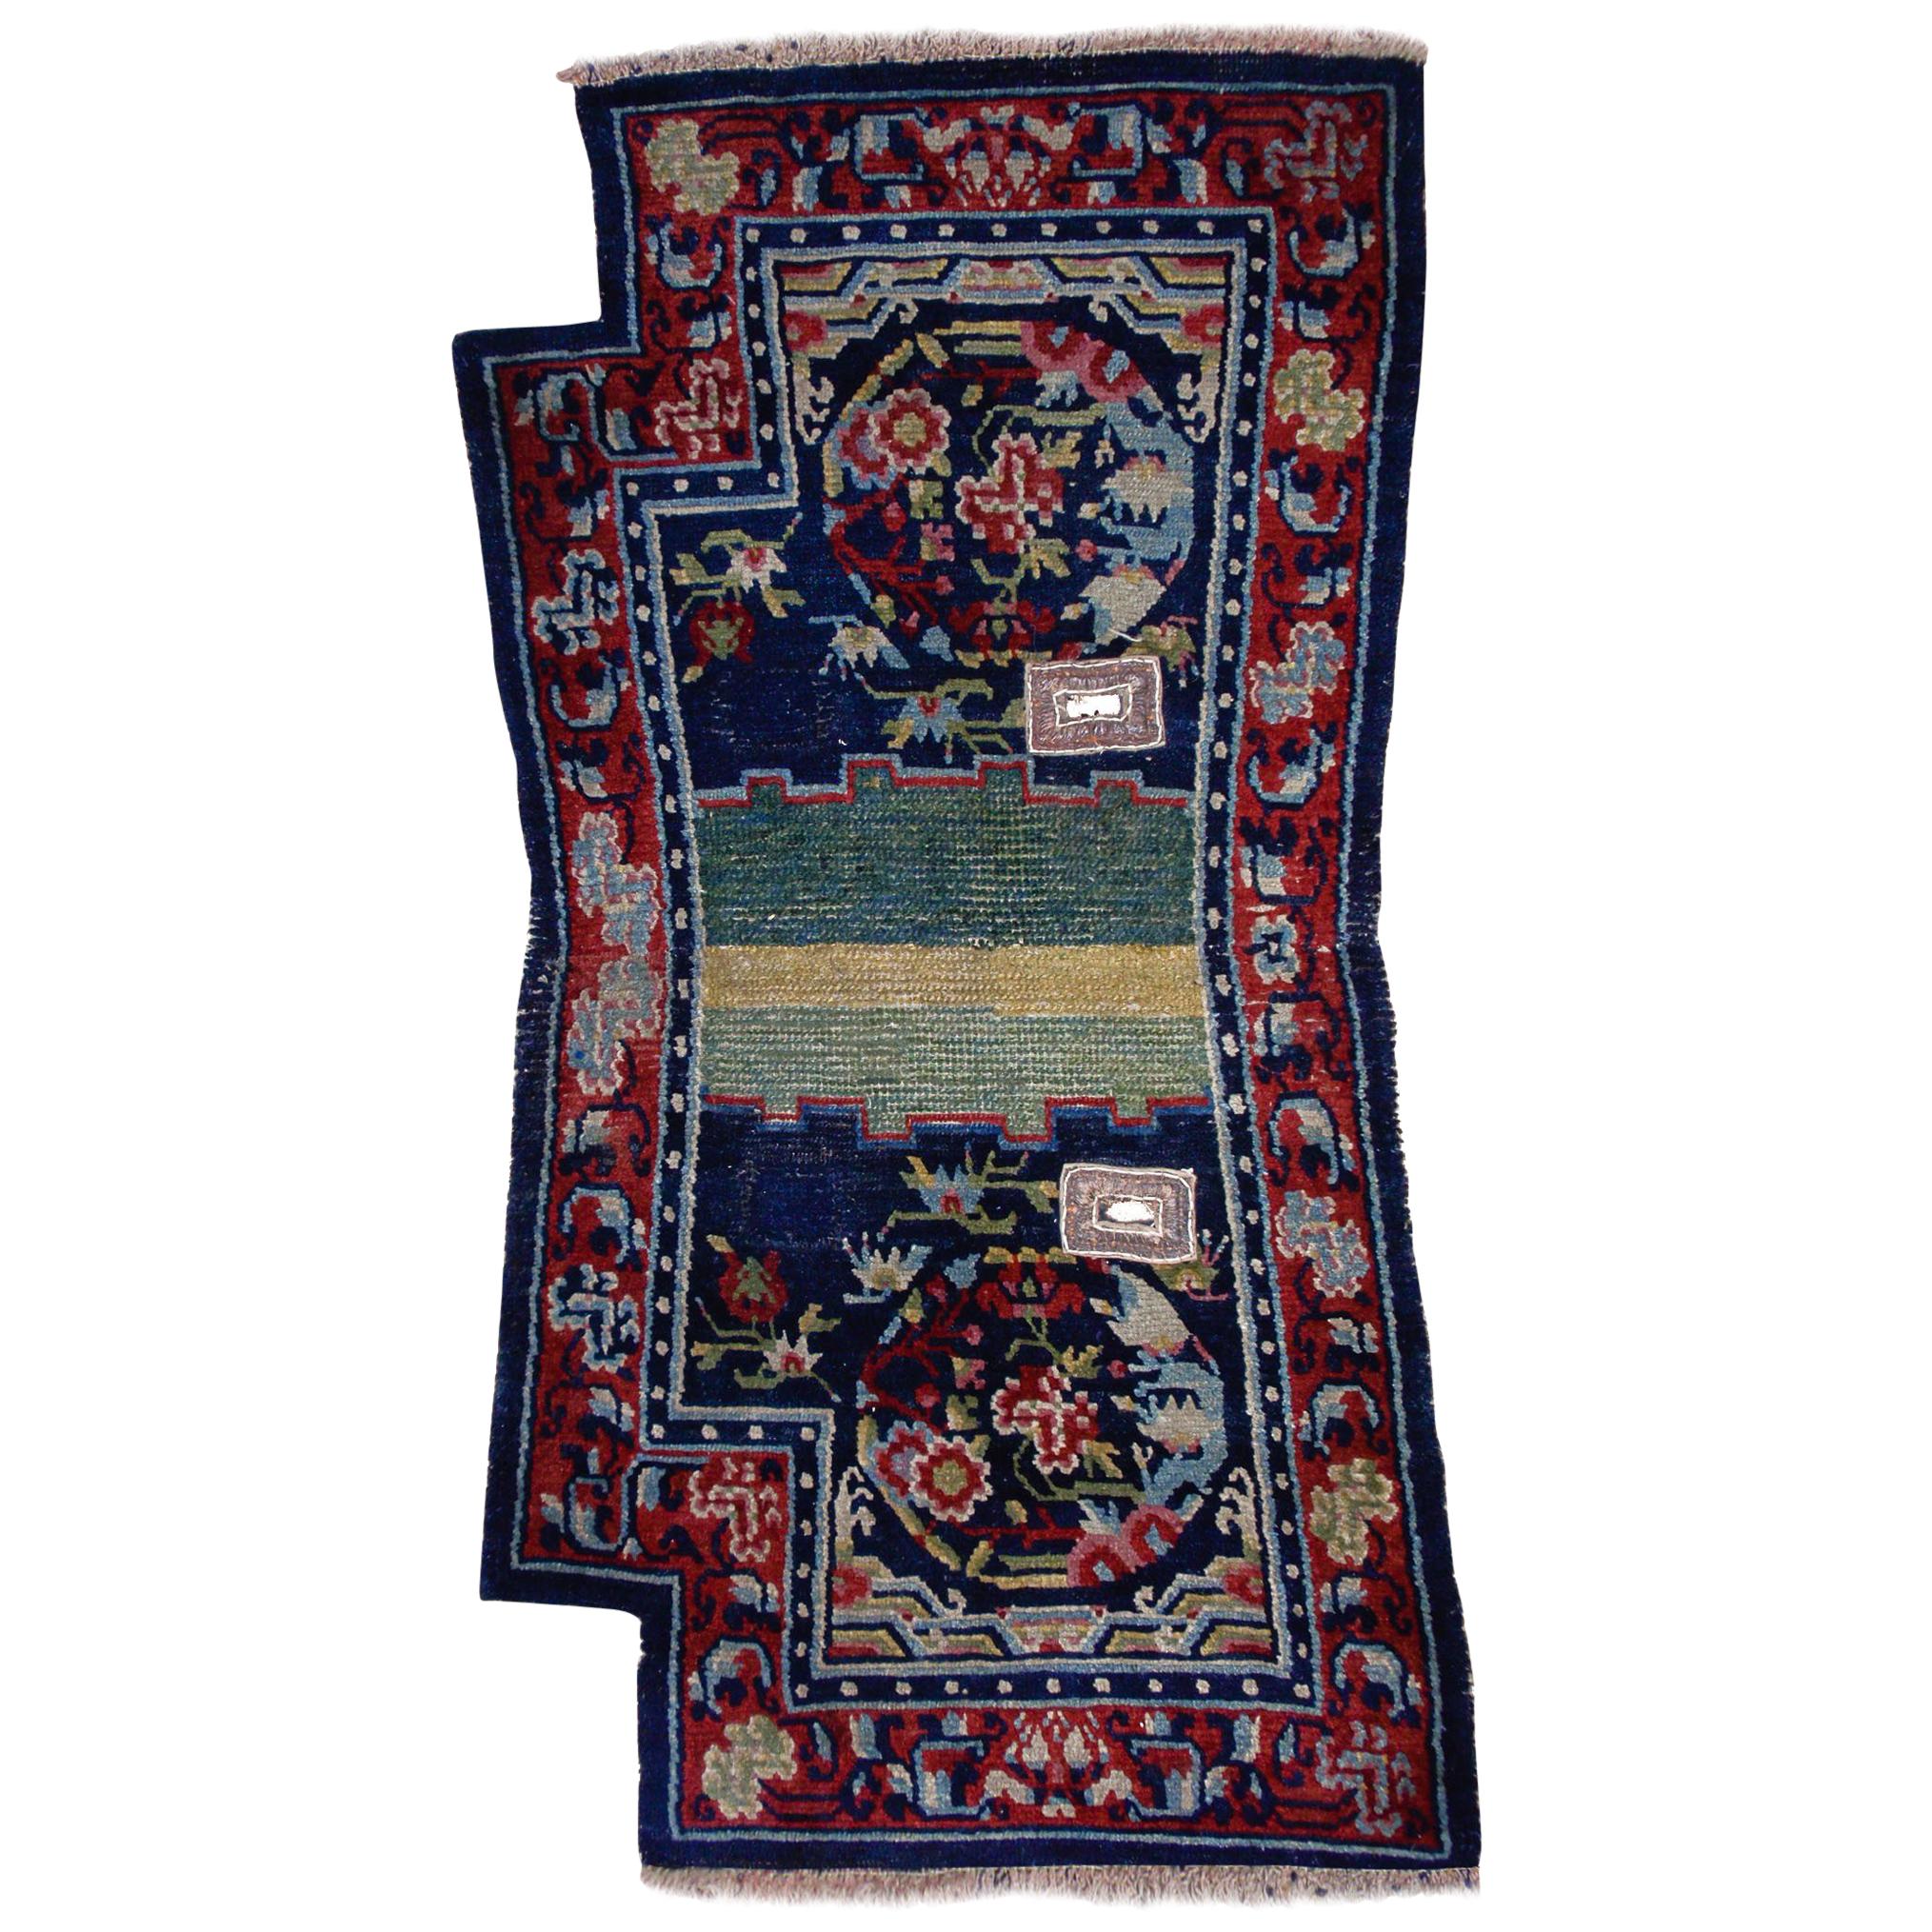 19th Century Peony Flower Medallions Blue Green and Red Saddle Horse Tibetan Rug